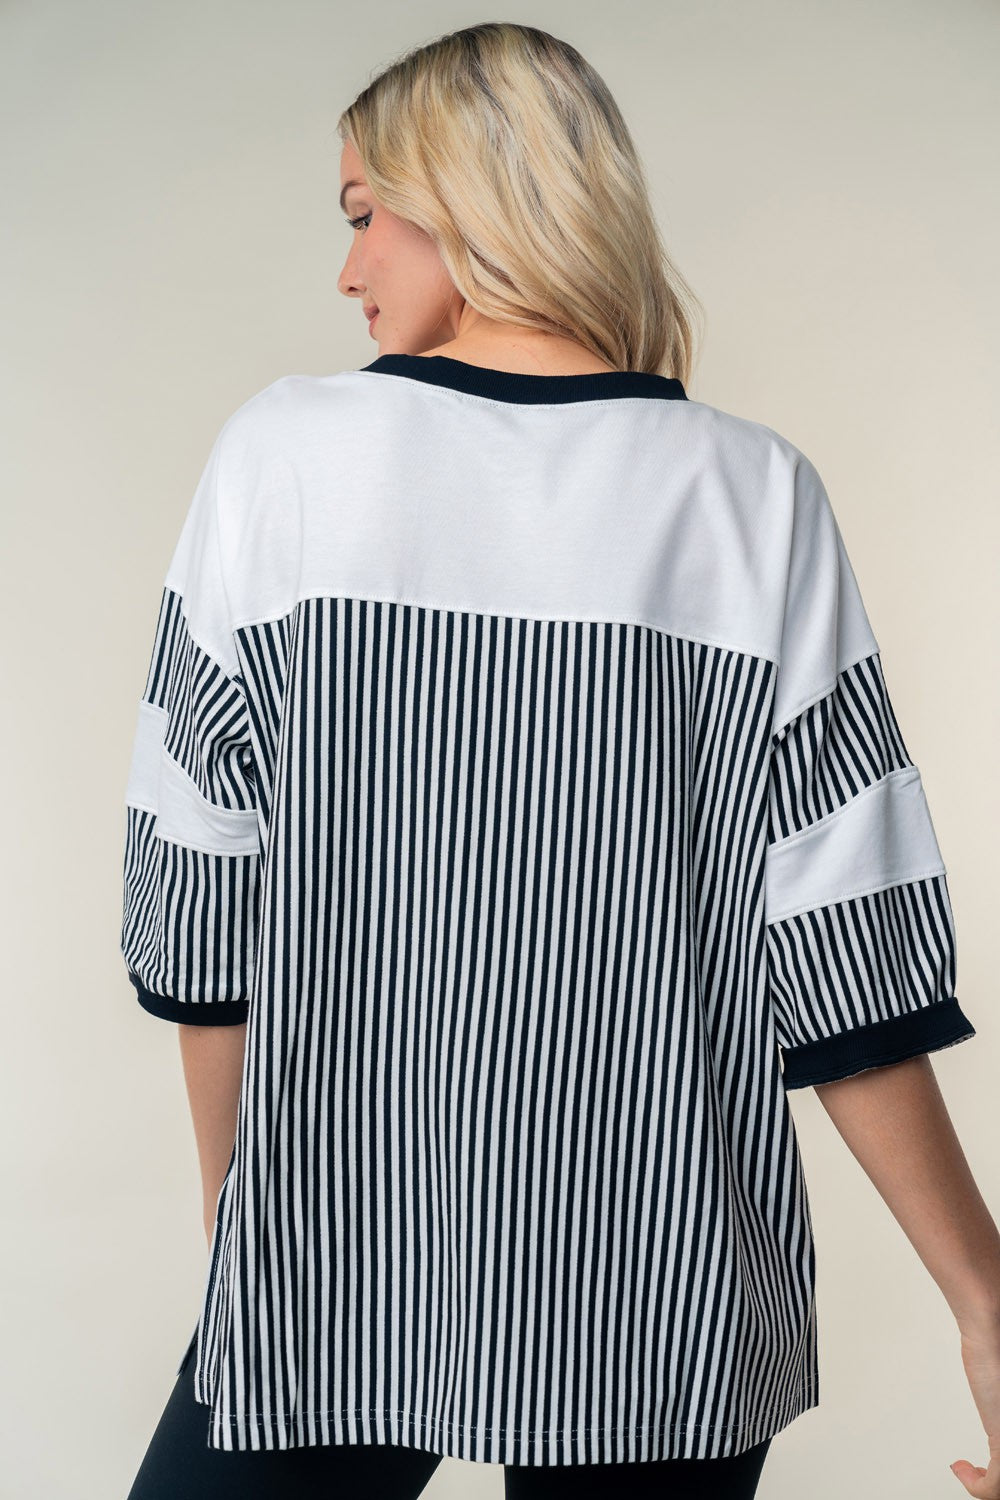 White Birch Full Size Striped Contrast Round Neck TopWhite Birch Full Size Striped Contrast Round Neck TopThe Striped Contrast Round Neck Top is a stylish and versatile piece that features classic stripes with contrasting accents around the neckline. This top offers a moClothingTrendsiLive Online MallWhite Birch Full Size Striped Contrast Round Neck Top